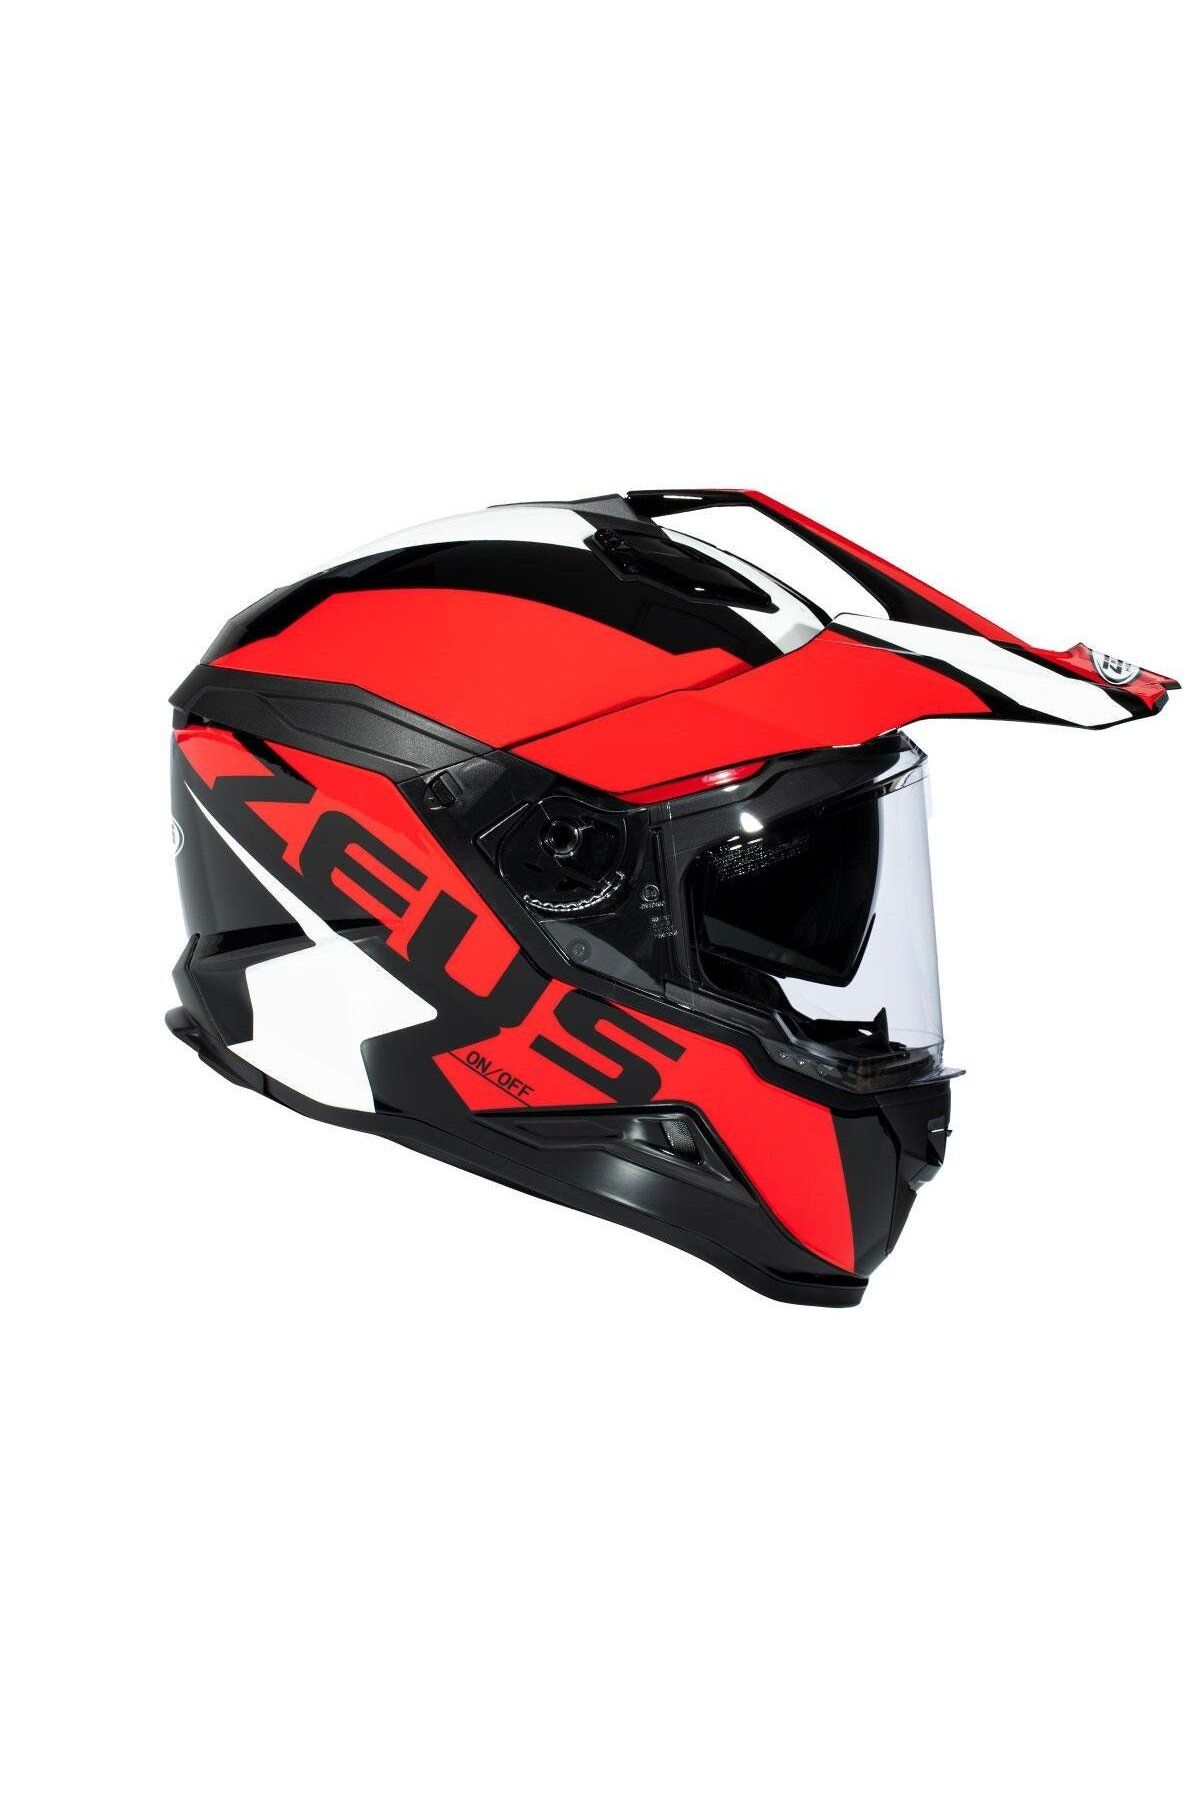 ZEUS KASK/ZS-913 SOLID BLACK/BF8-RED